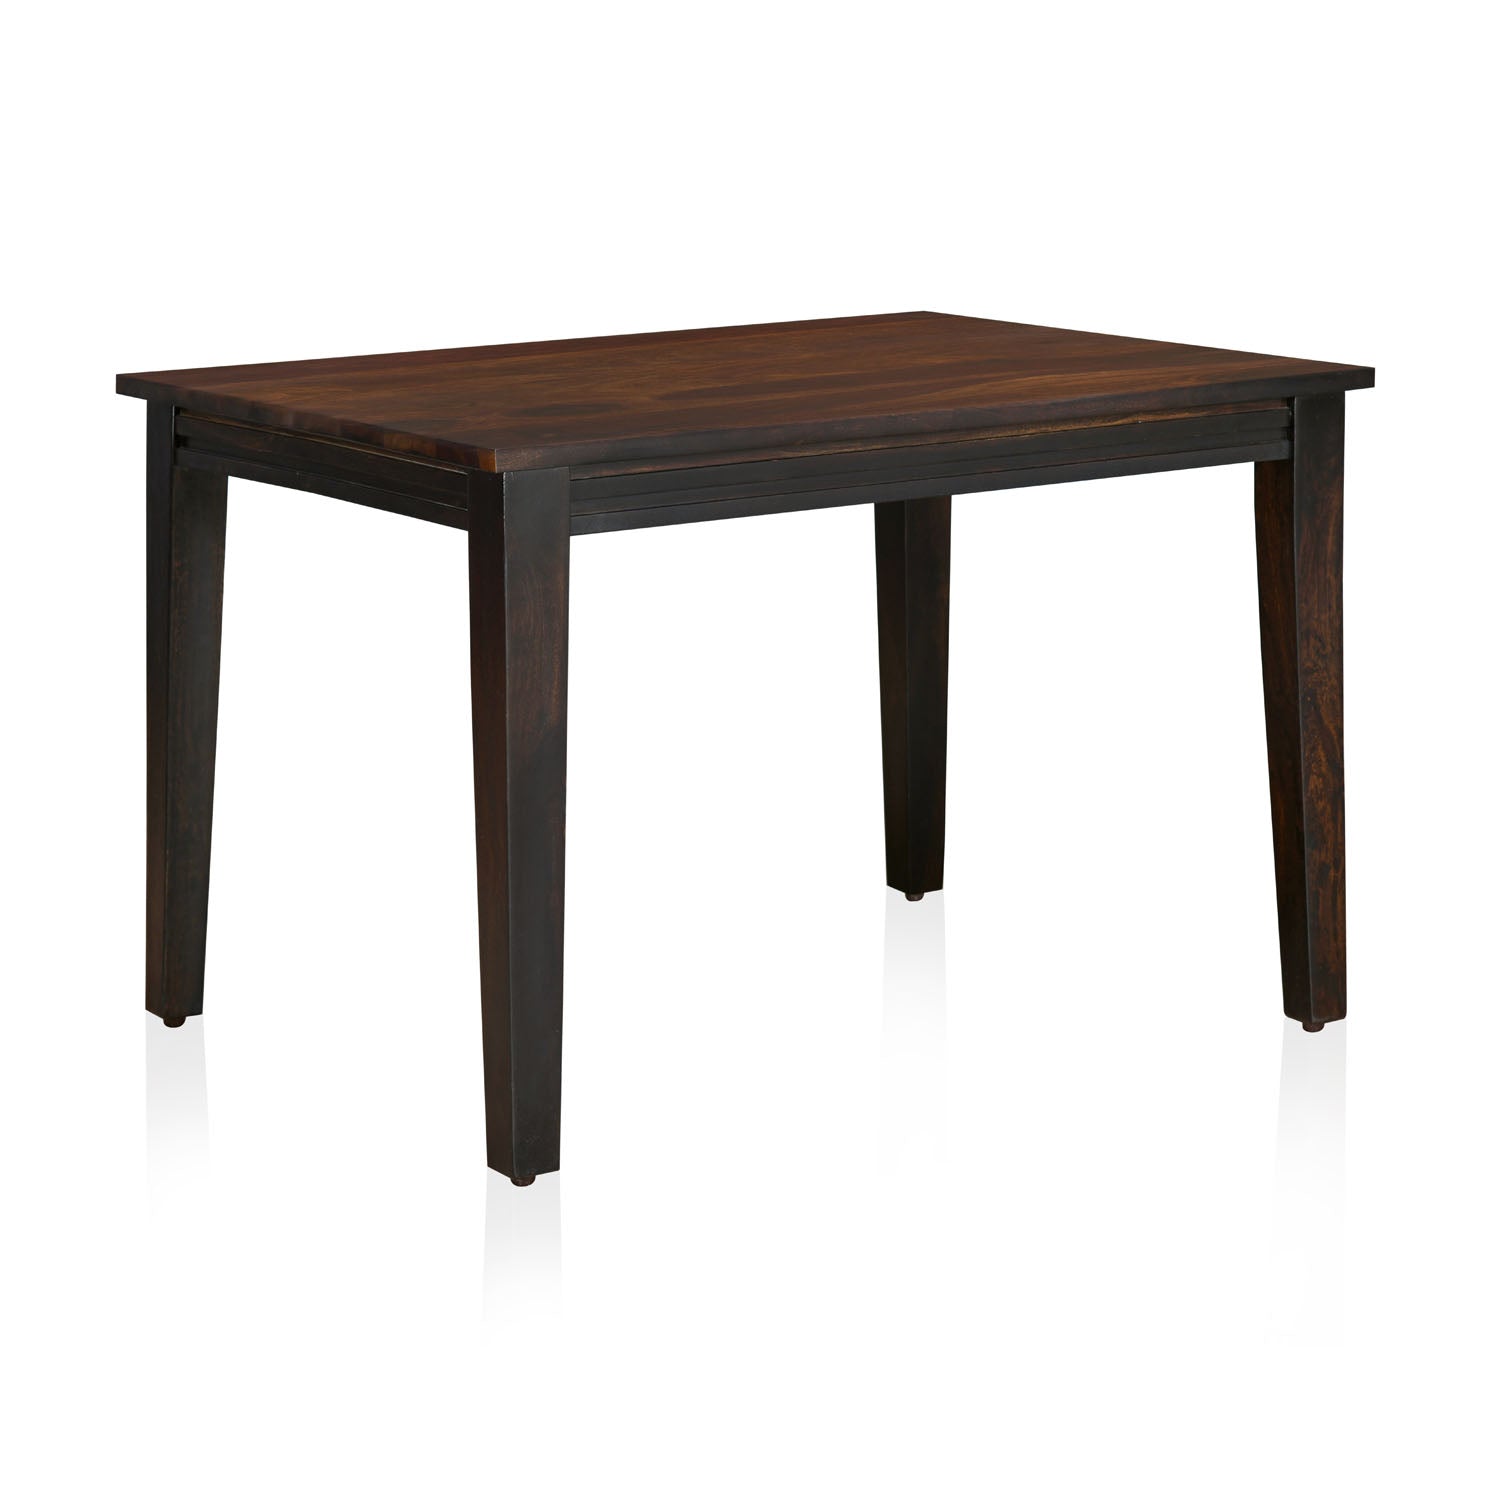 Virtue Solid Wood Dining Table (Natural Walnut)